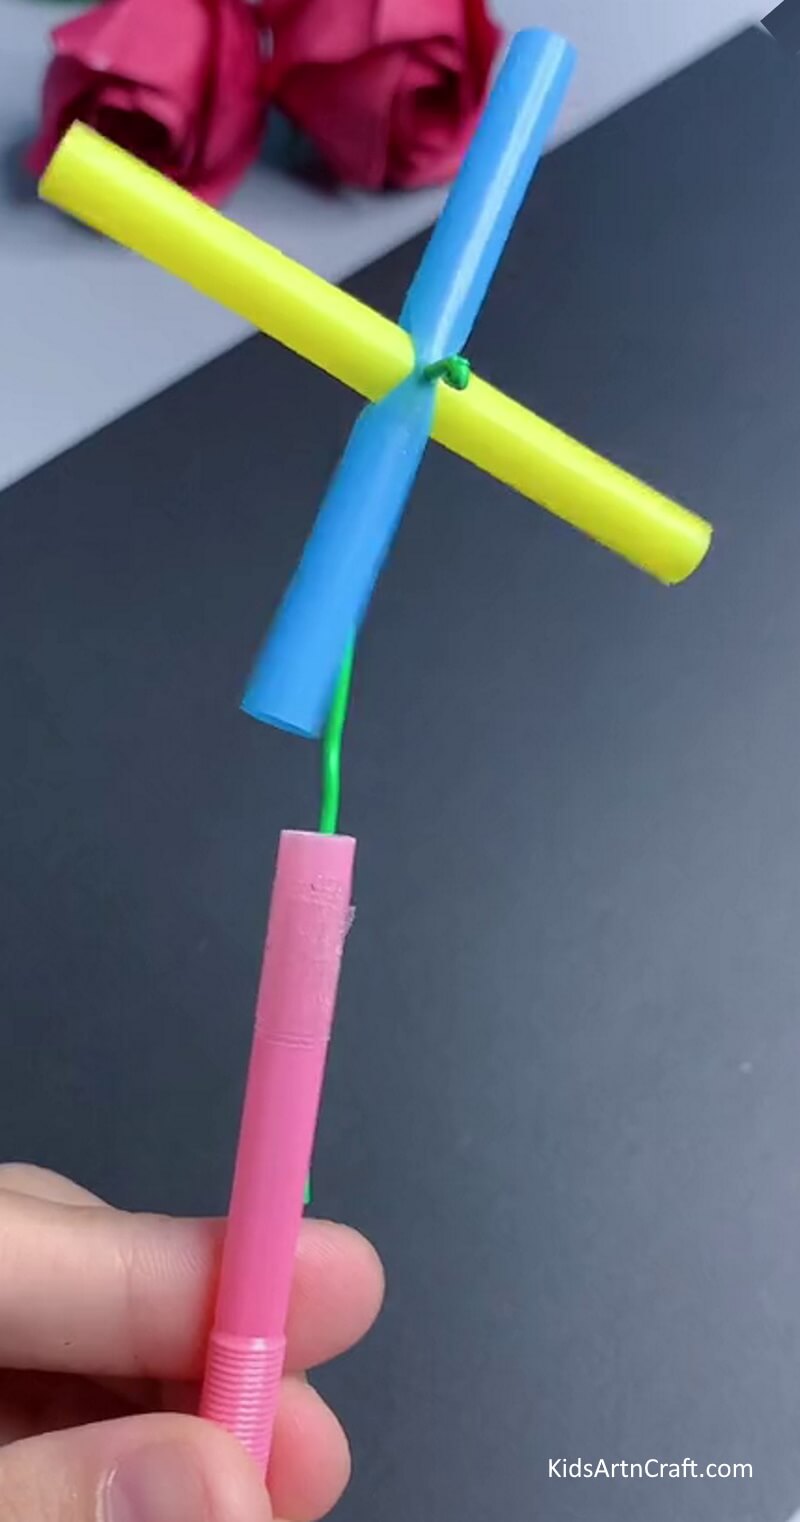 Cool Straw Fan Is Ready To Spin! - Follow This Tutorial For A Custom-Made Straw Fan Craft For Kids